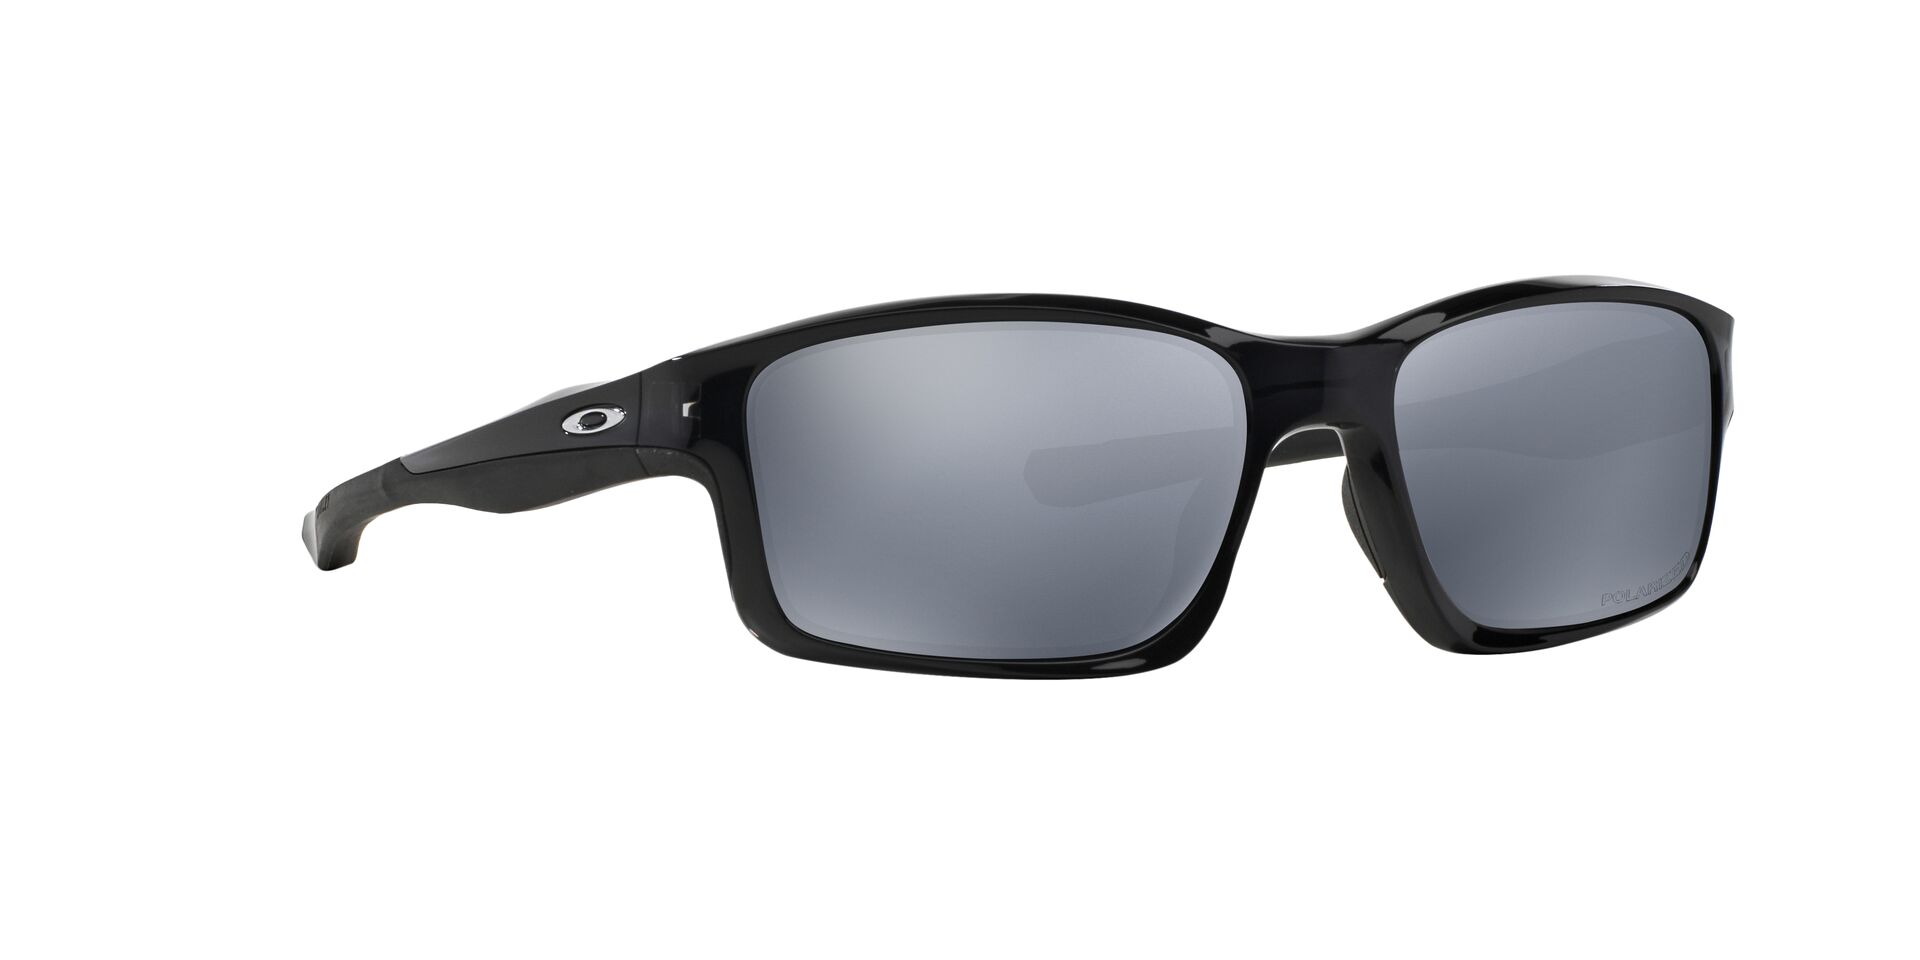 Our Top 3 Oakleys - Sunglasses and Style Blog - ShadesDaddy.com